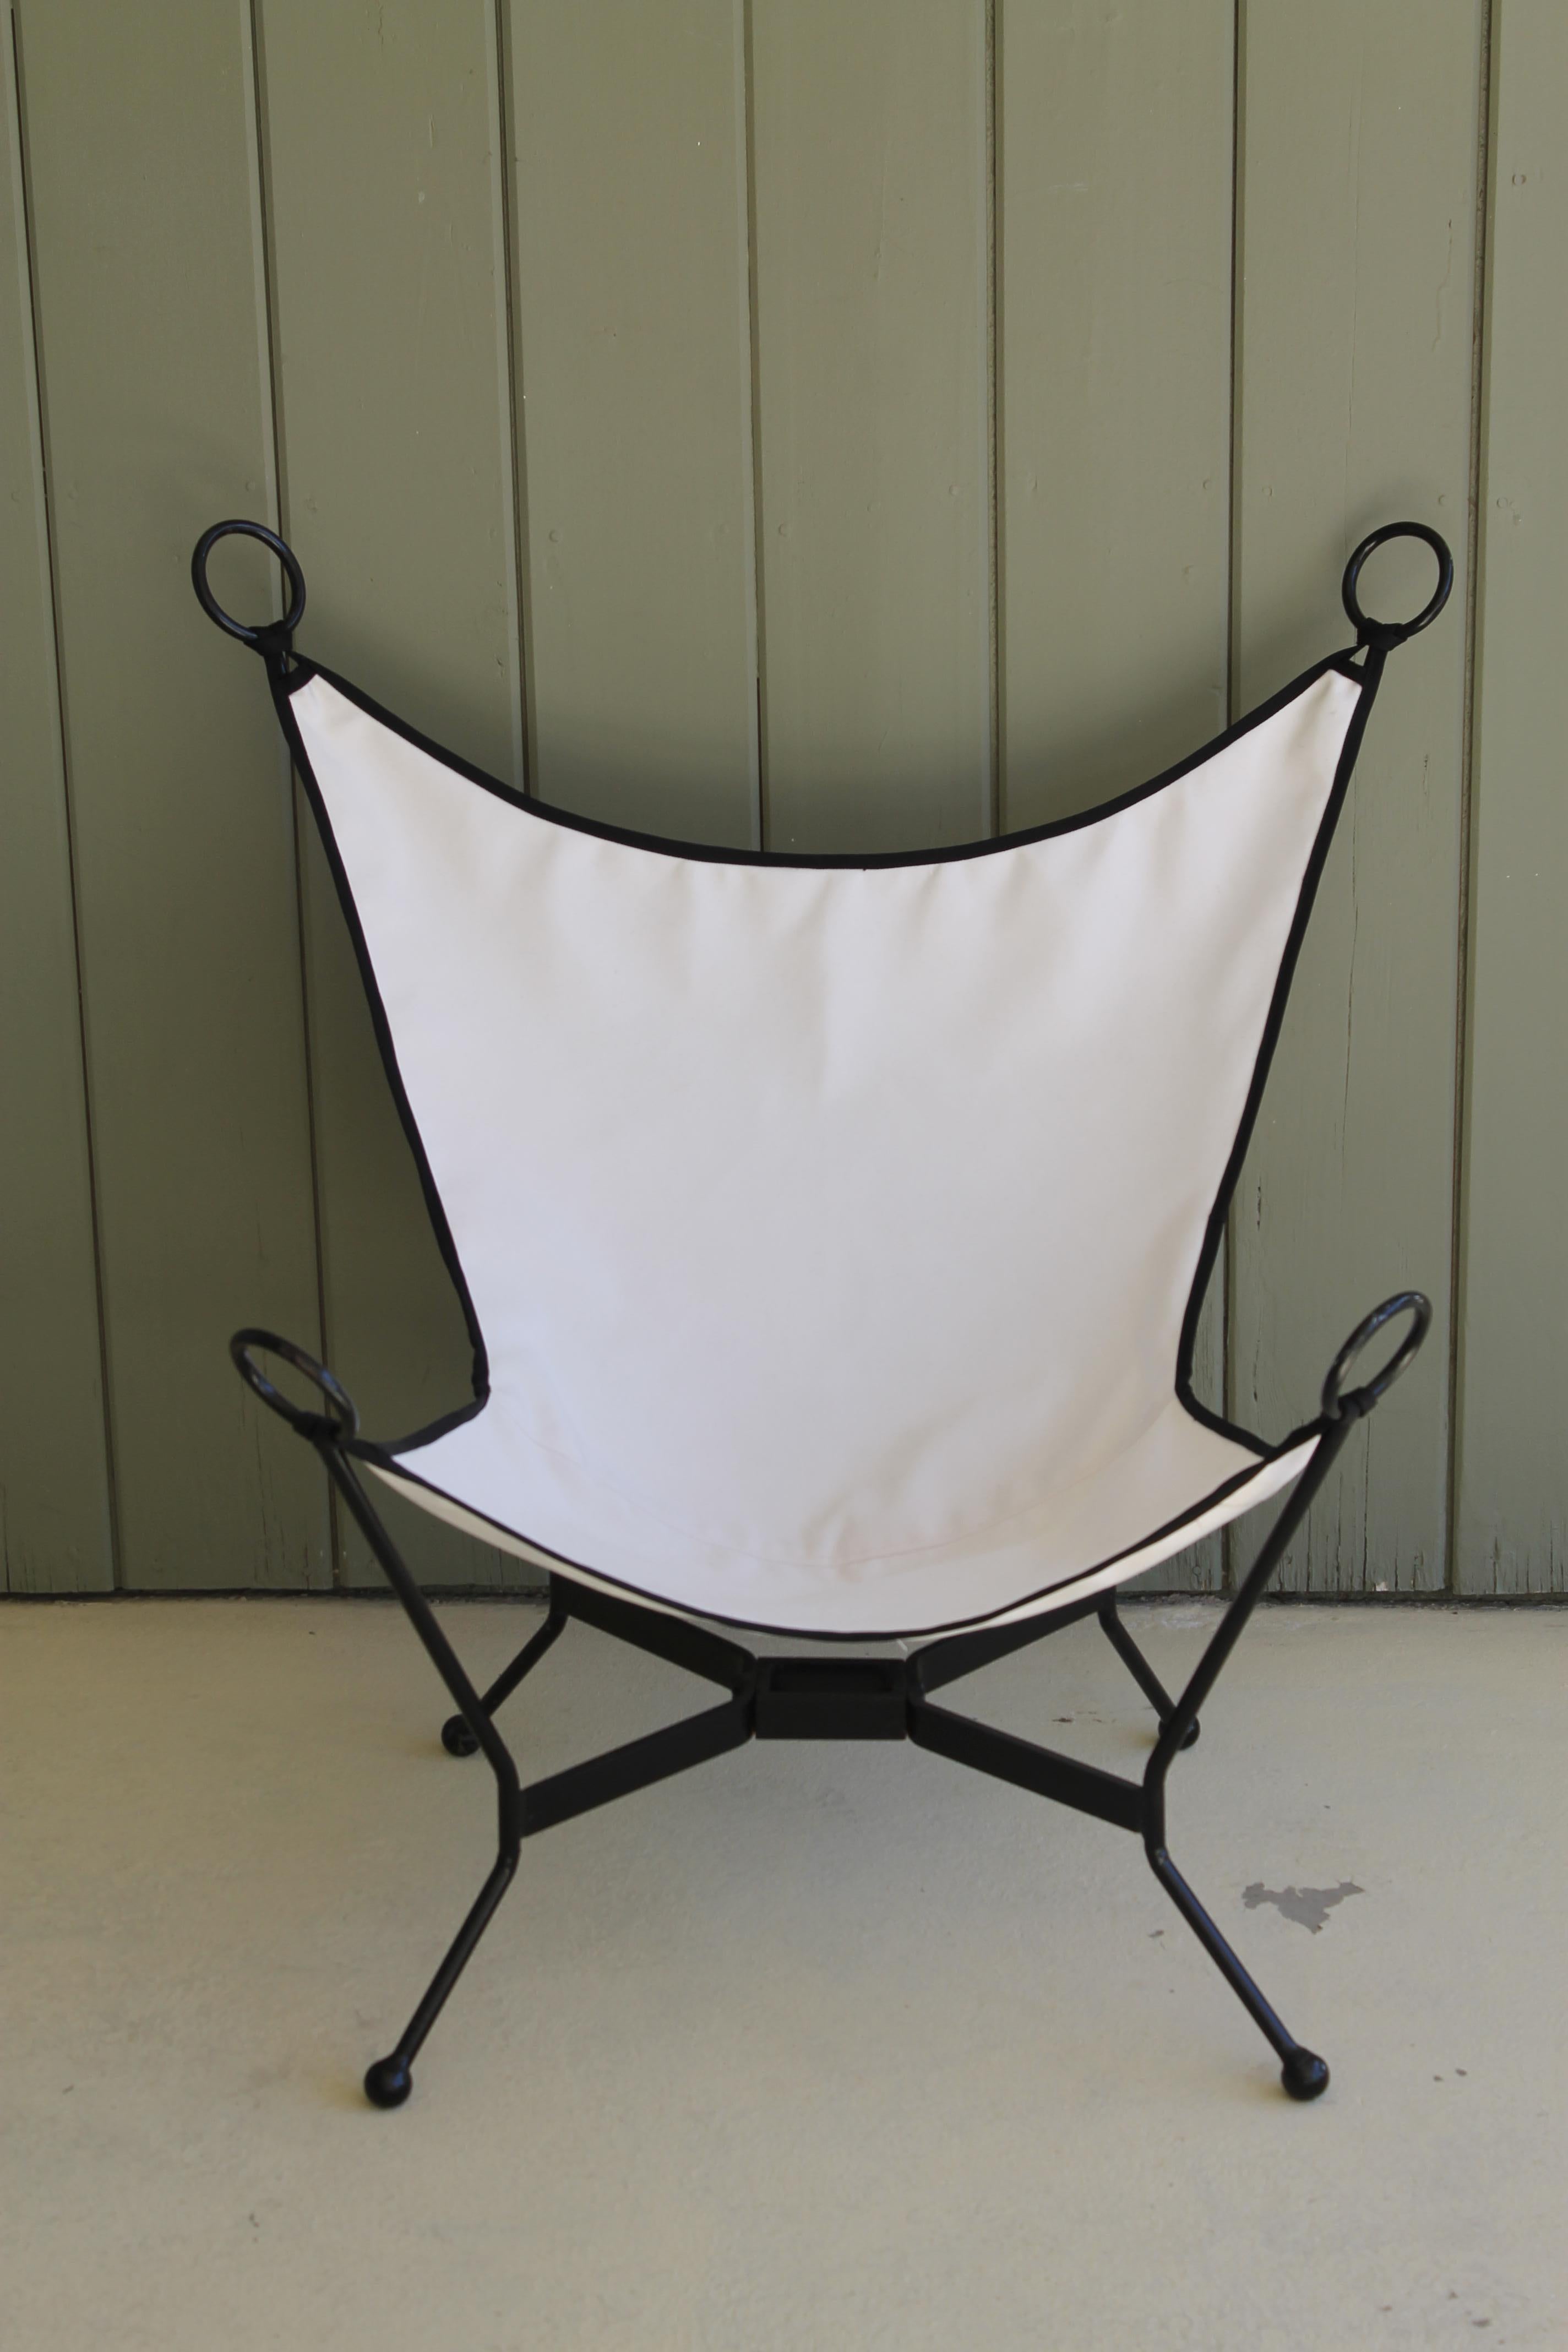 Pair of sling patio chairs. We had them powder coated a satin black and upholstered in sunbrella fabric. One chair is slightly smaller (or larger) then the other. The large chair is 36” wide, 32” deep and 35” high. Seat height is 12.5”. The small